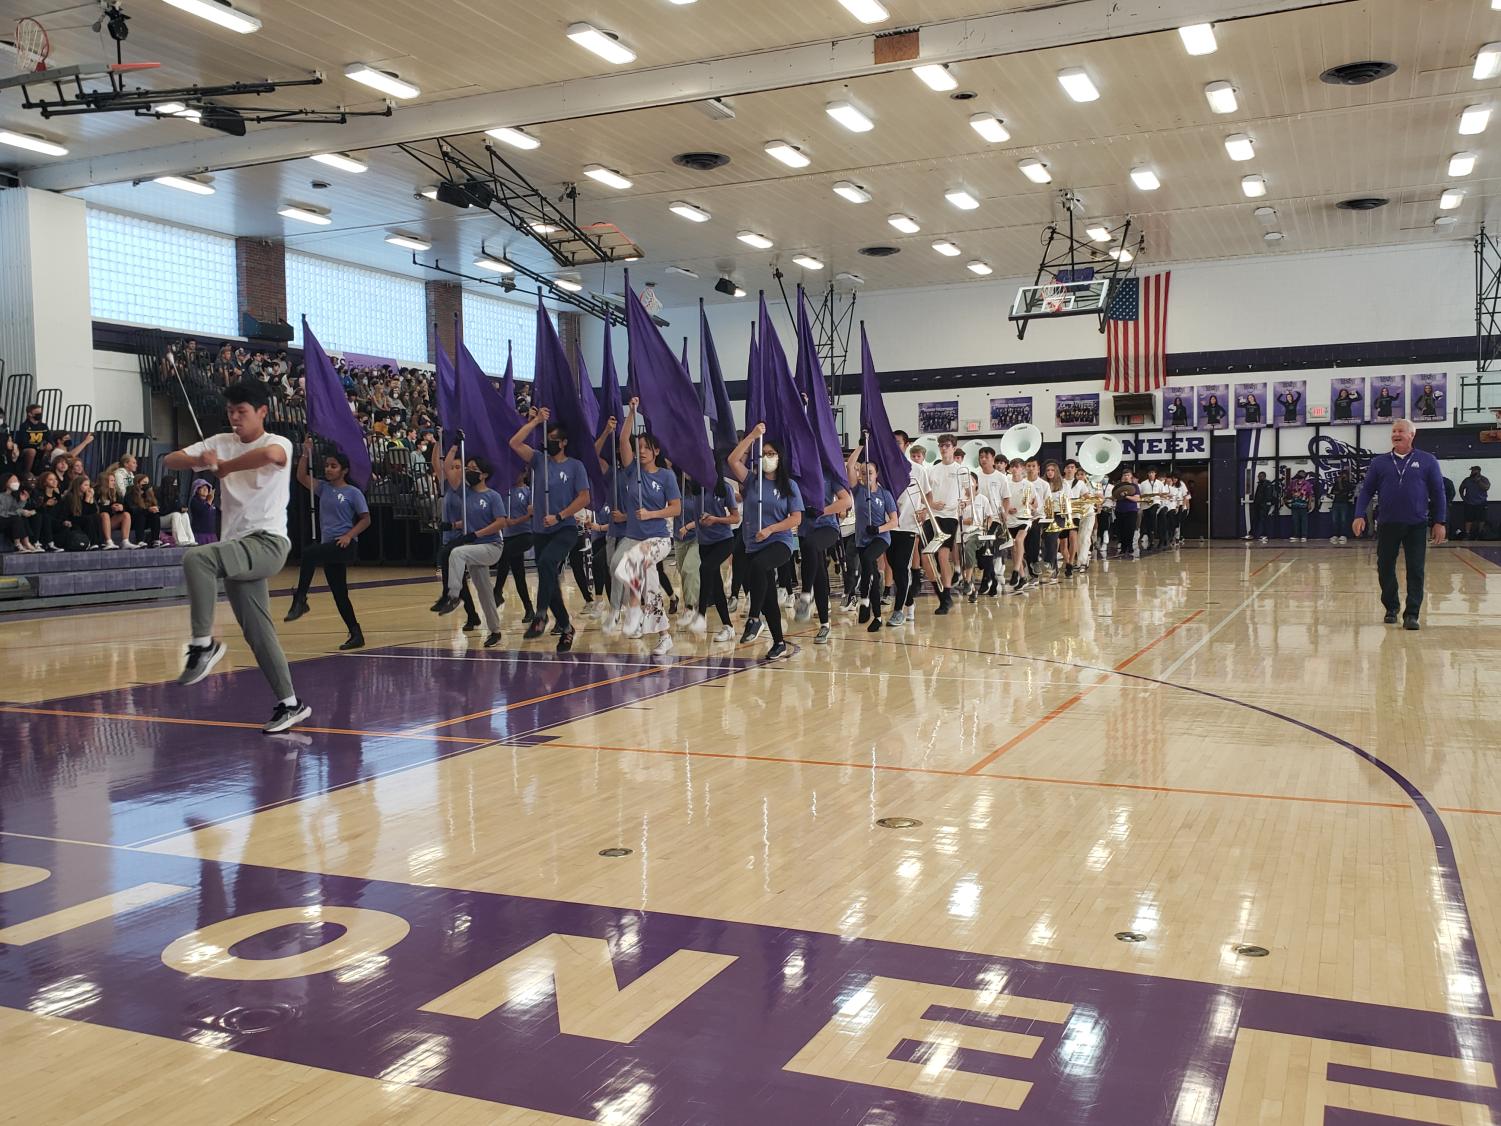 Homecoming+Pep+Rally+fills+gym+with+sights+and+sounds